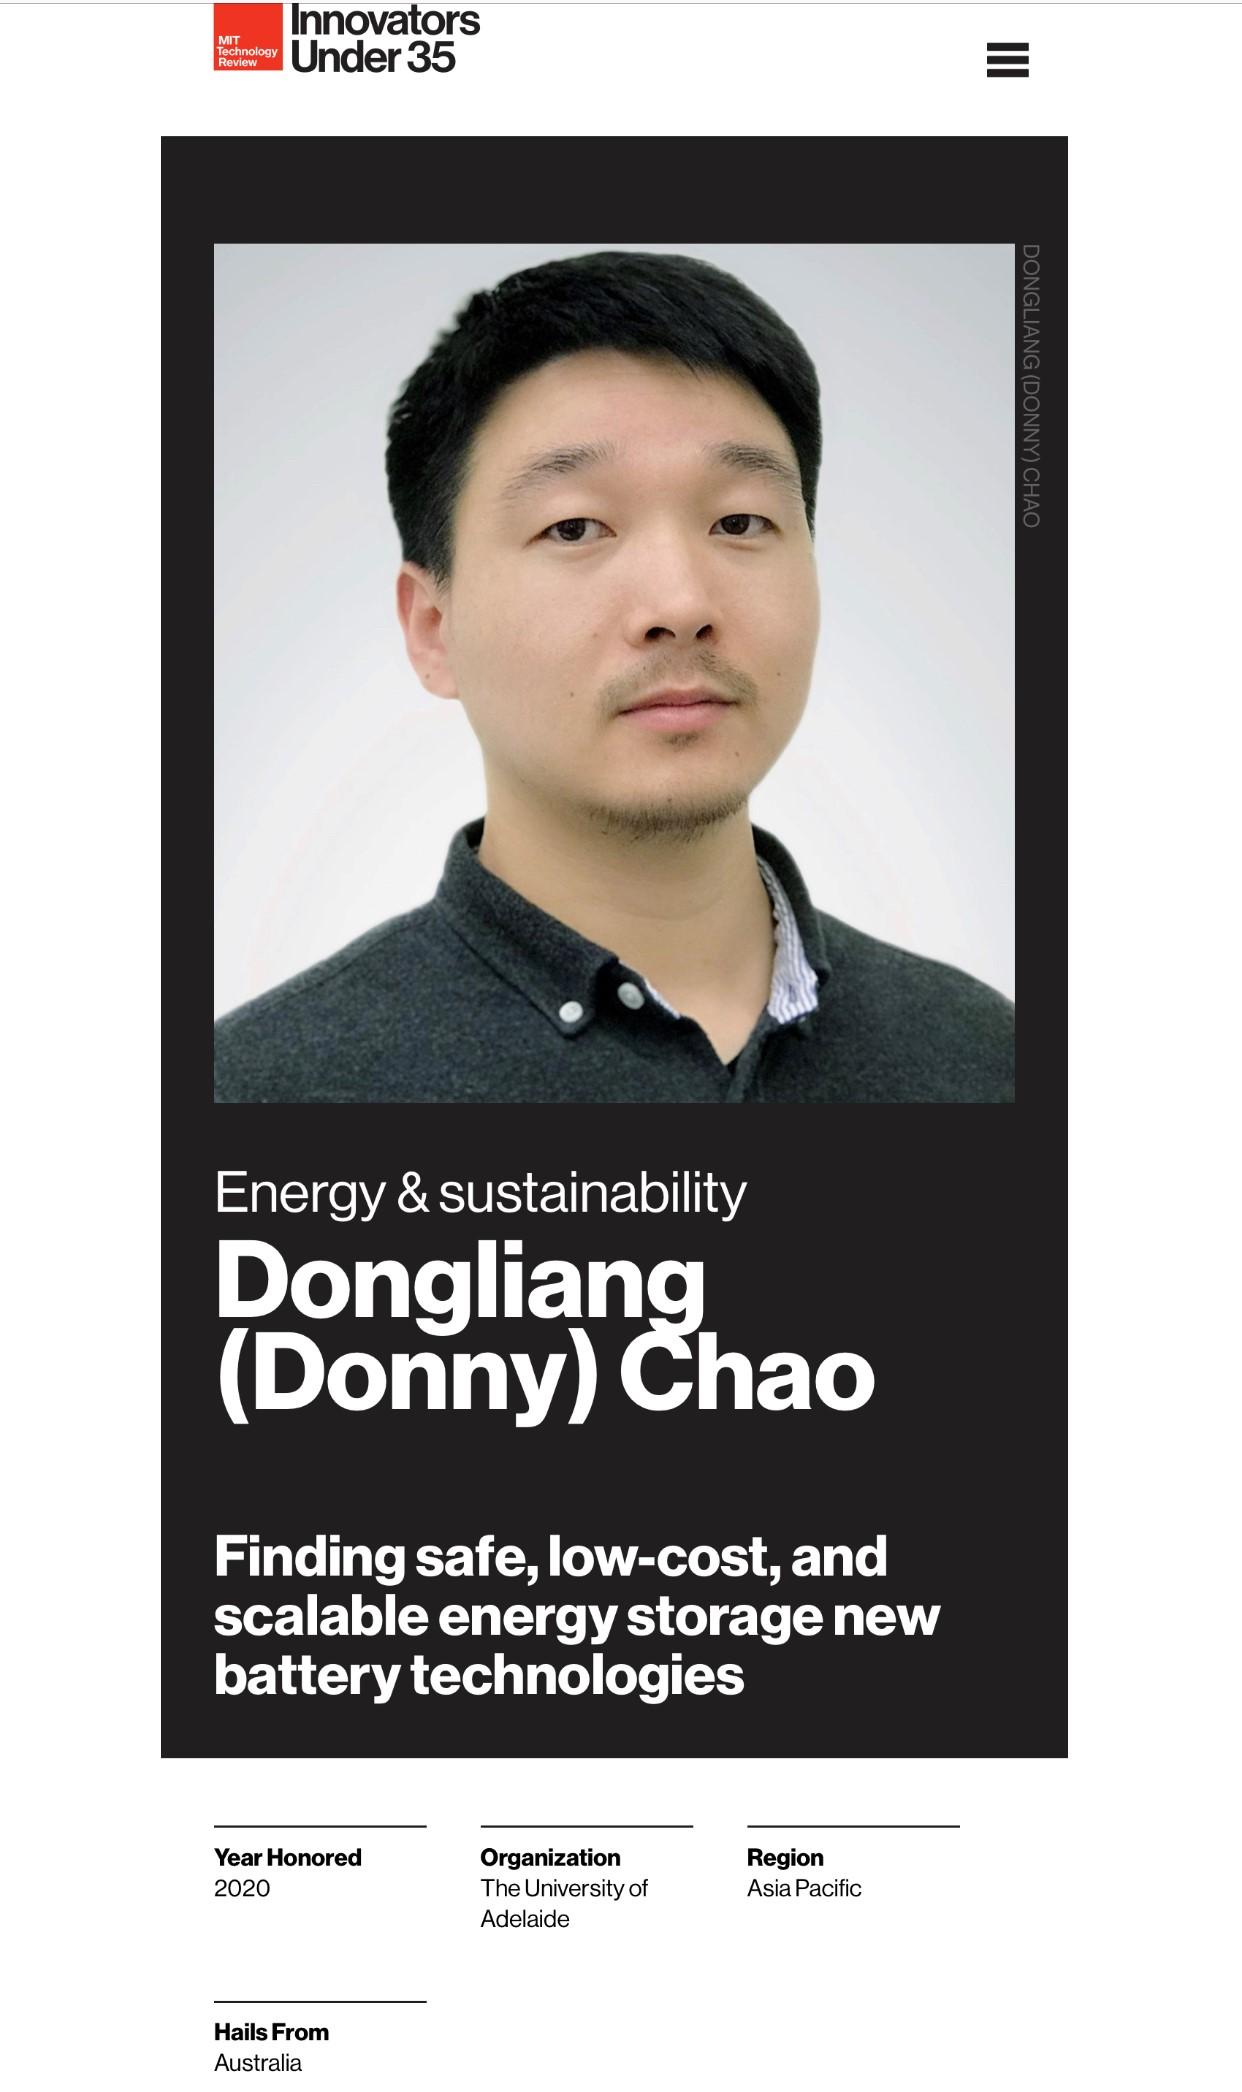 Dr. Dongliang (Donny) Chao wins the Innovators Under 35 MIT 35 award